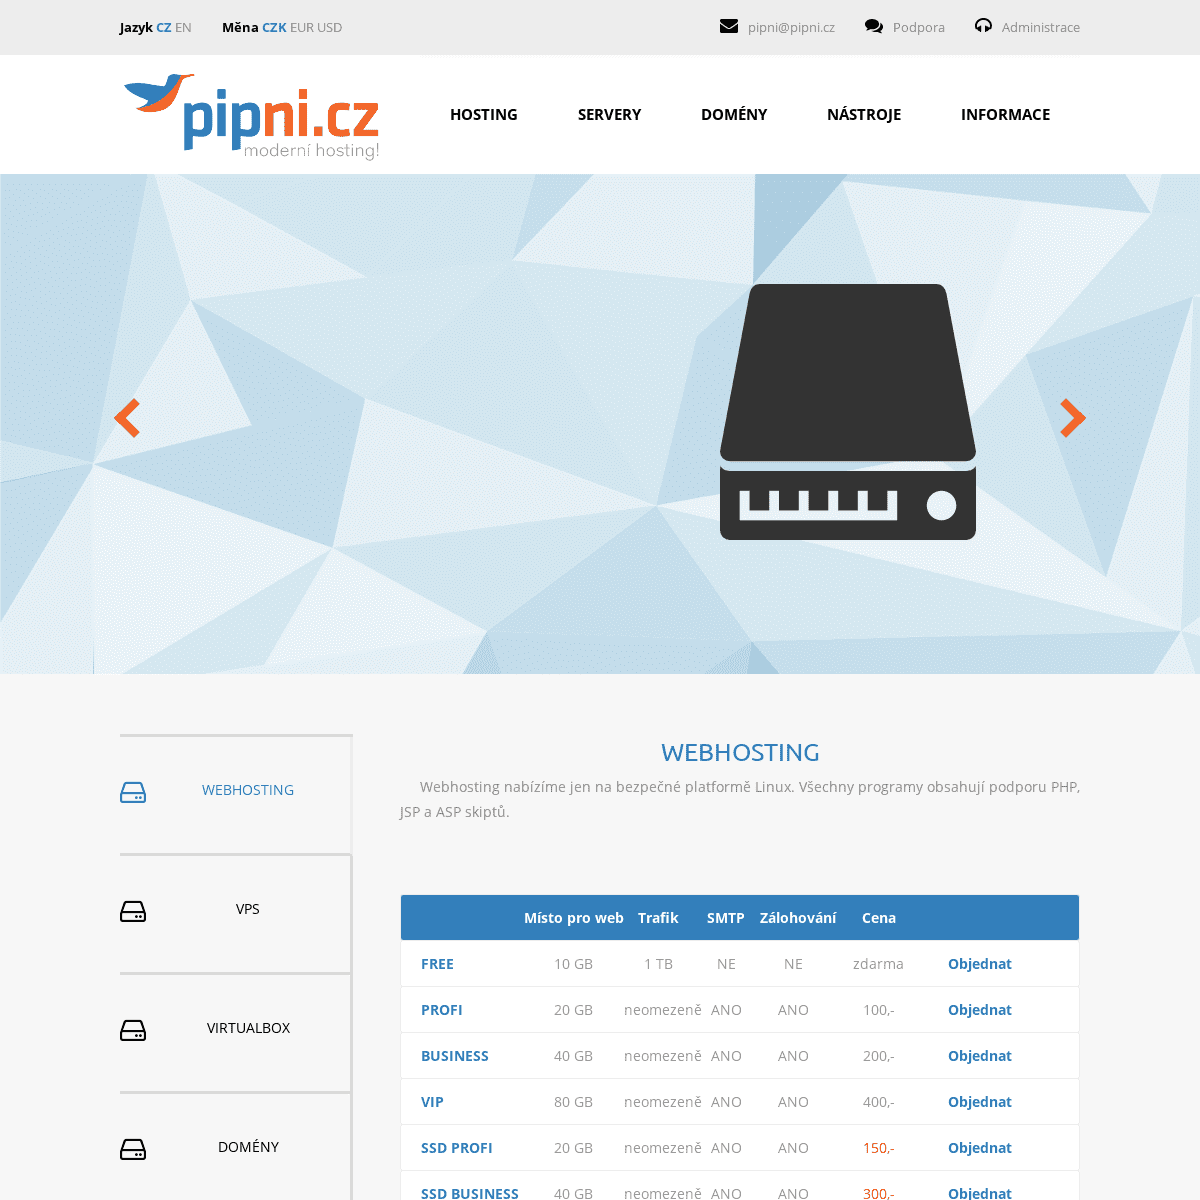 A complete backup of https://pipni.cz